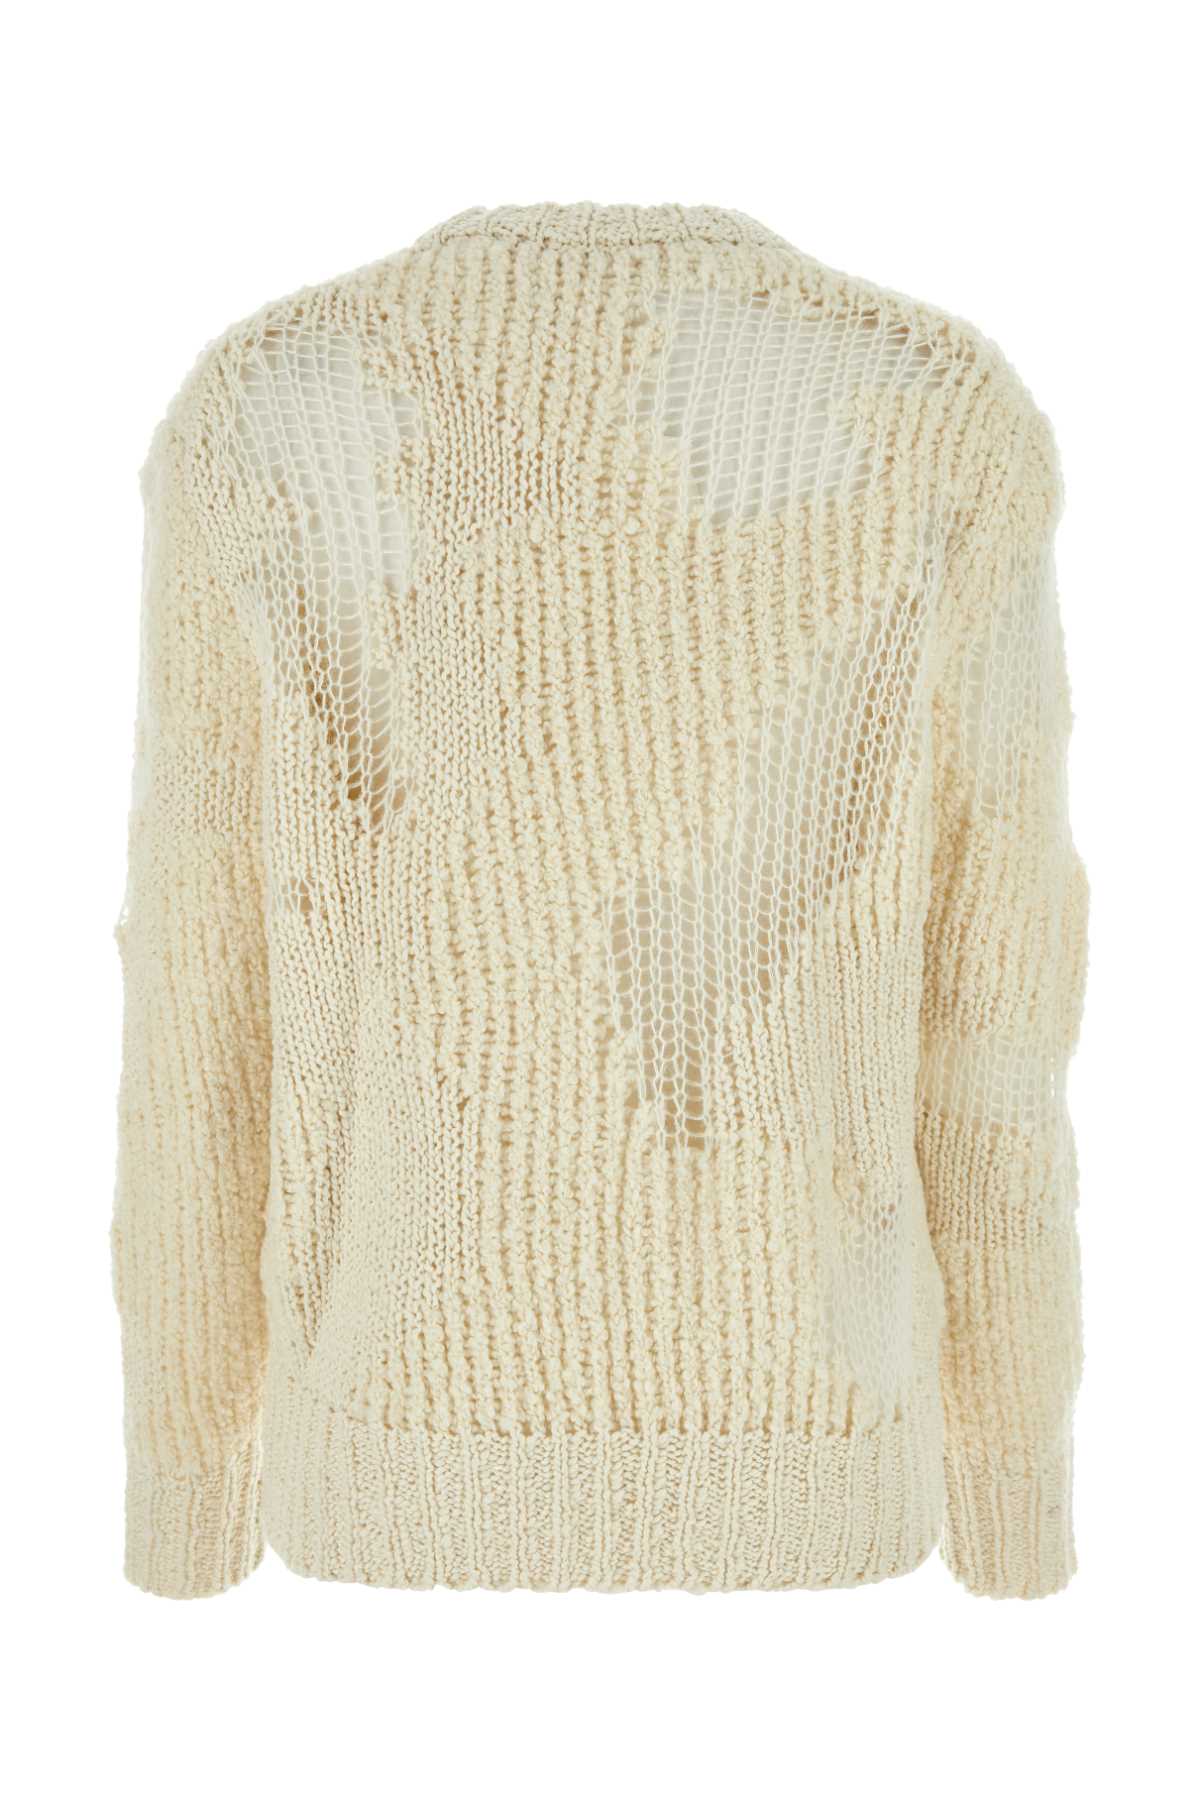 Chloé Ivory Wool Blend Sweater In Iconicmilk